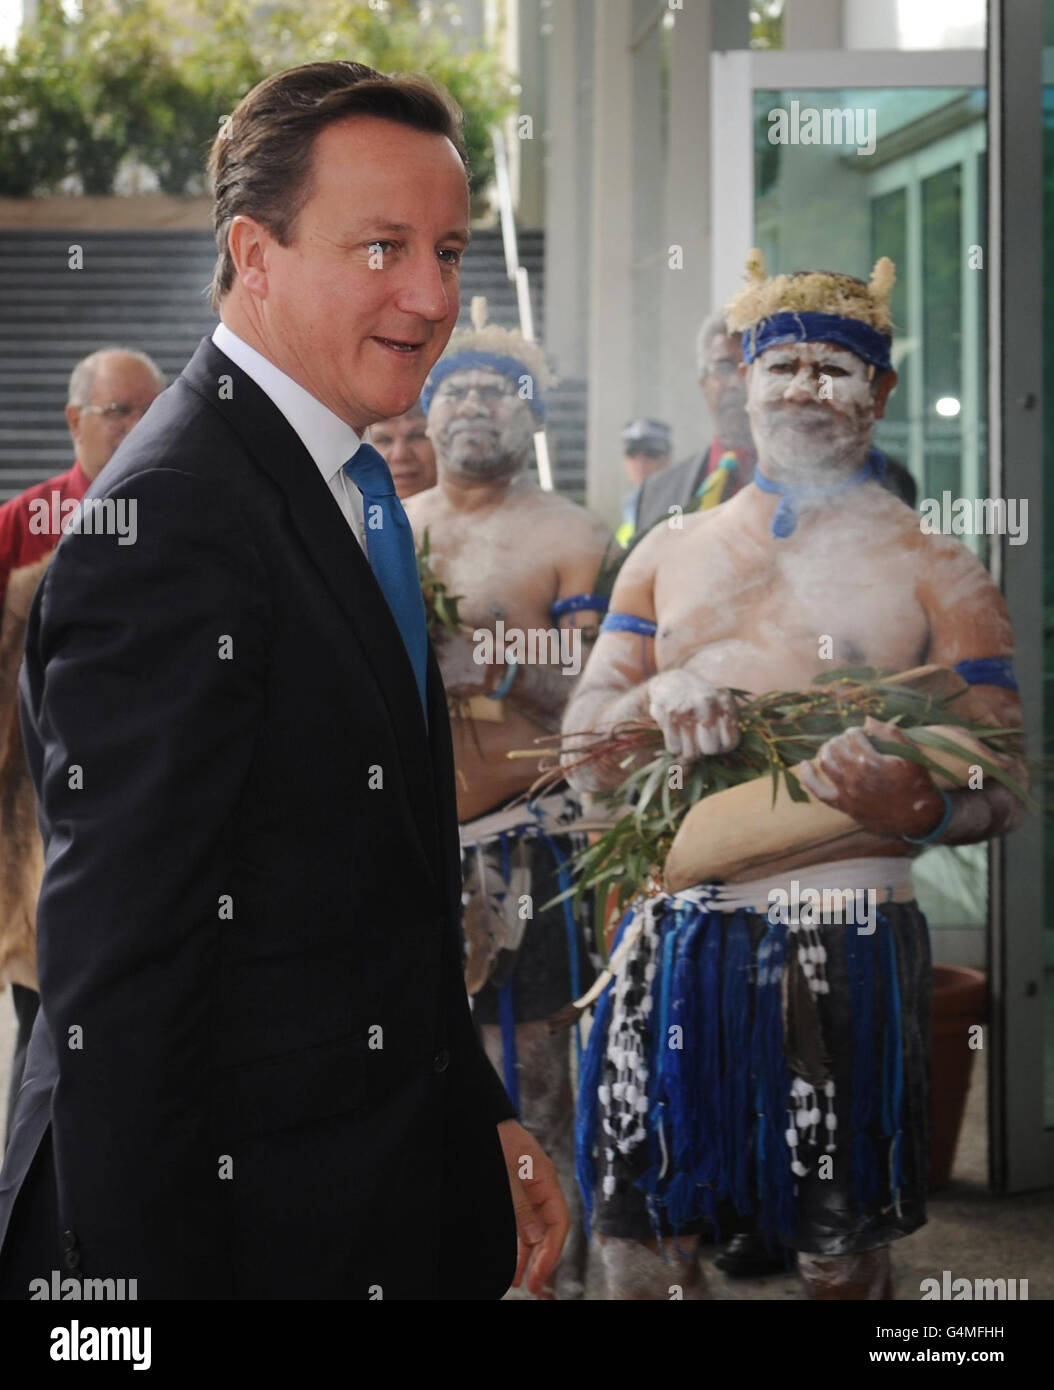 Prime Minister David Cameron arrives at the Commonwealth Heads of Government Meeting in Perth, Australia, for the biennial summit which brings together political leaders from across the 54-country group. Stock Photo